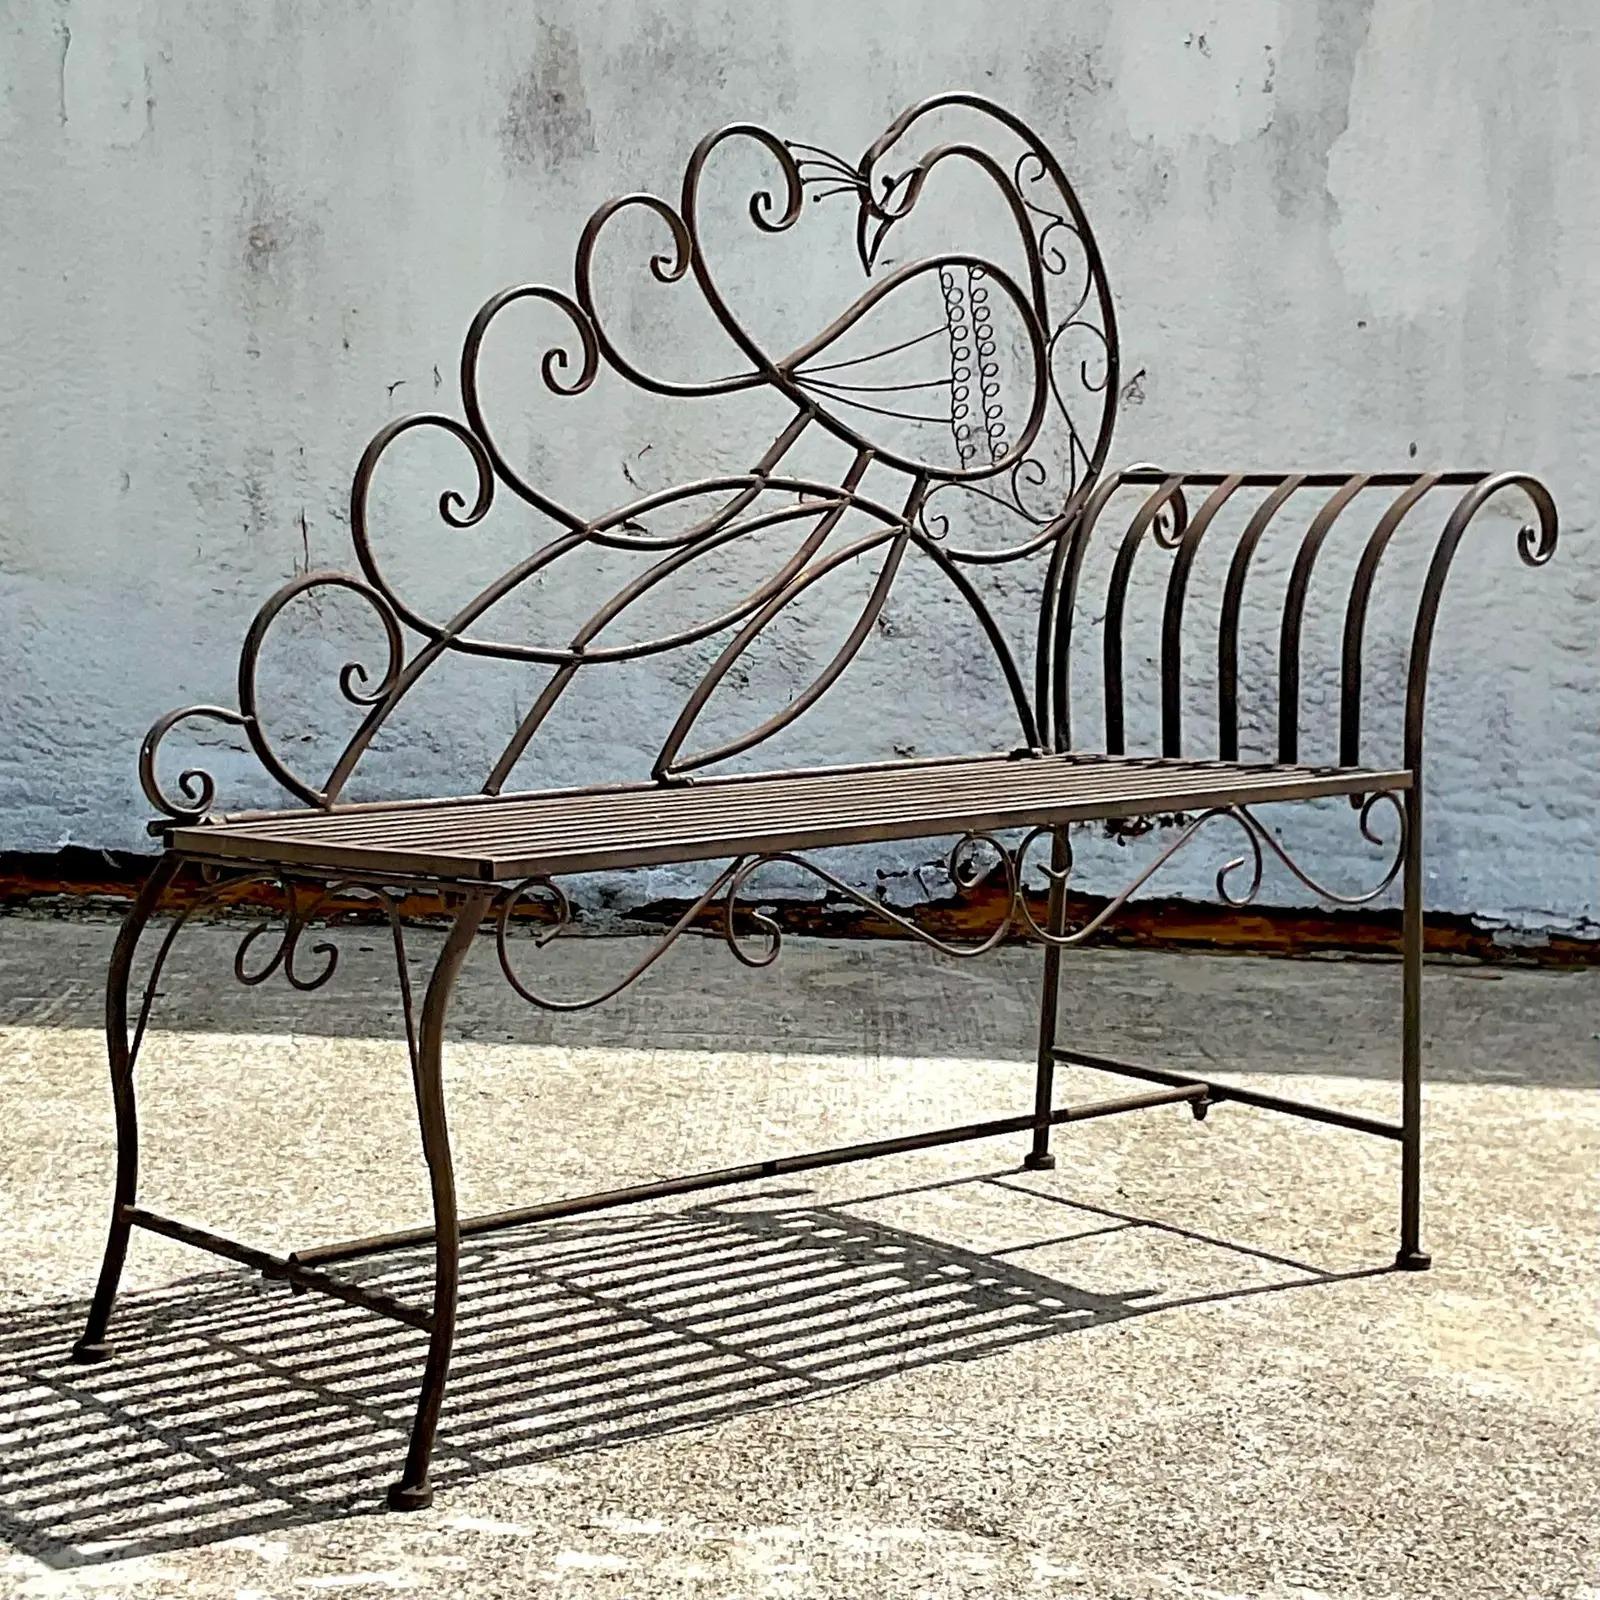 A fantastic vintage Coastal wrought iron bench. A beautiful peacock design with a high dramatic back. Perfect as is or change any color you like. You decide! Use in indoors or outdoors. Acquired from a Palm Beach estate.